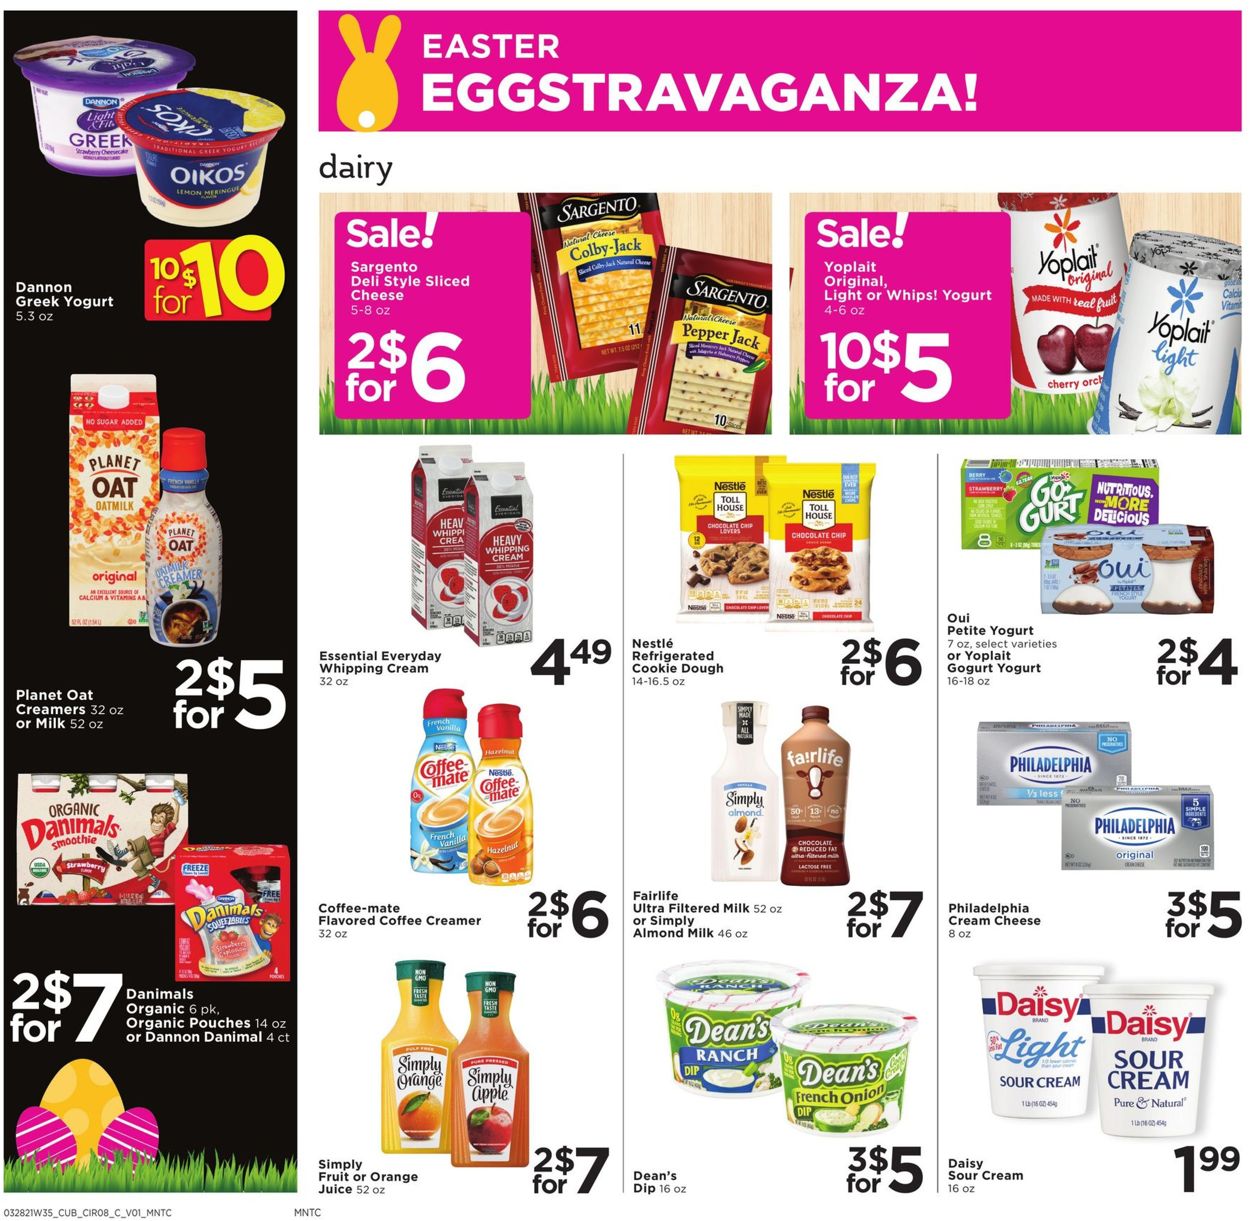 Cub Foods Easter 2021 ad Current weekly ad 03/28 04/04/2021 [8